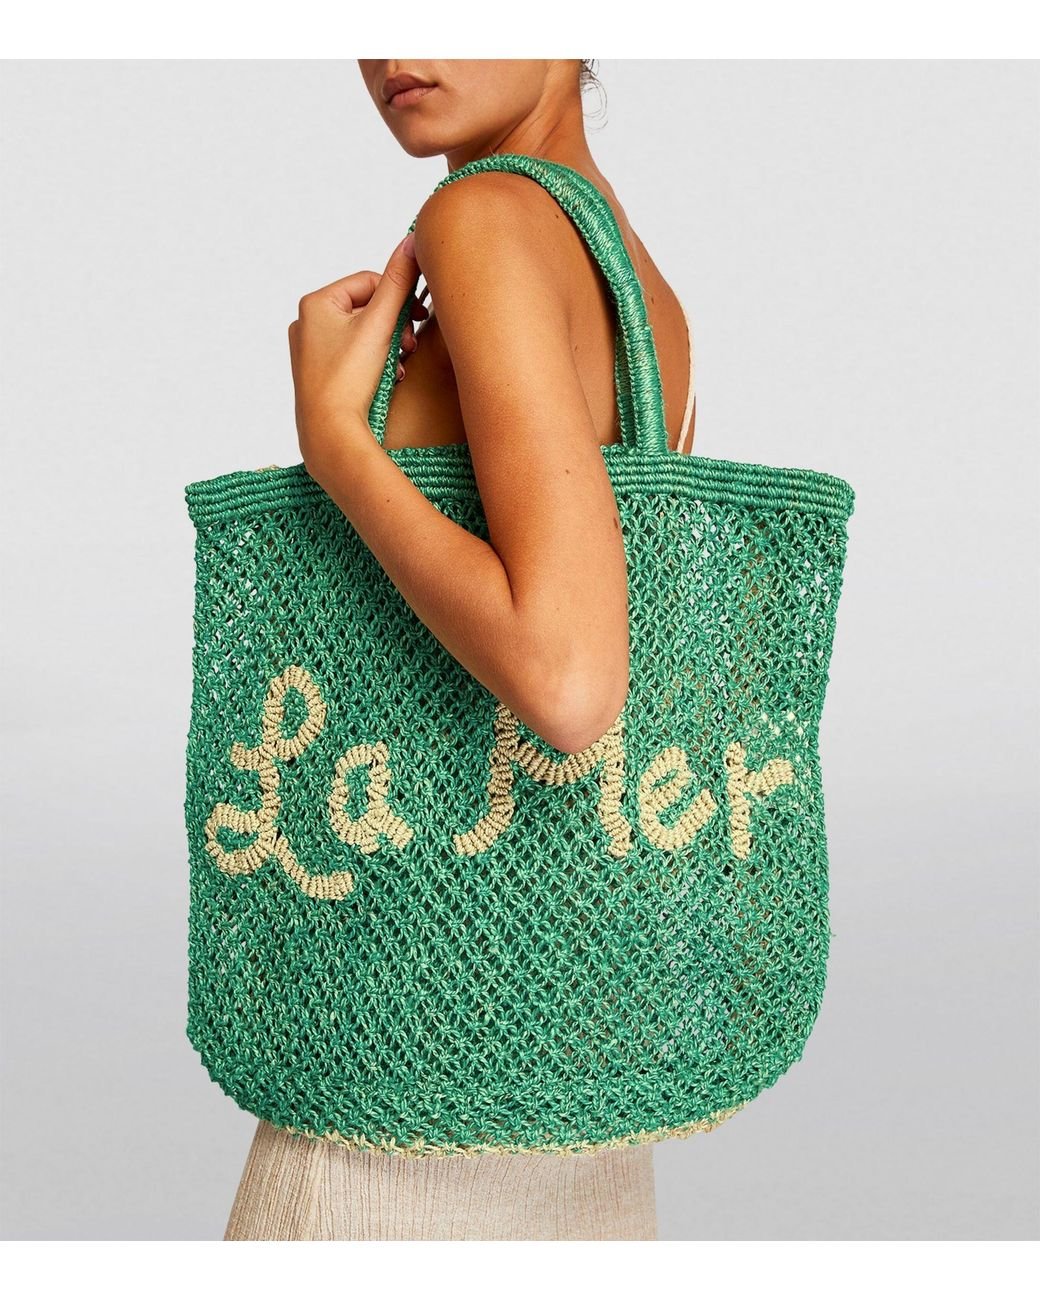 The Jacksons Woven Stella Merci Tote Bag for Women